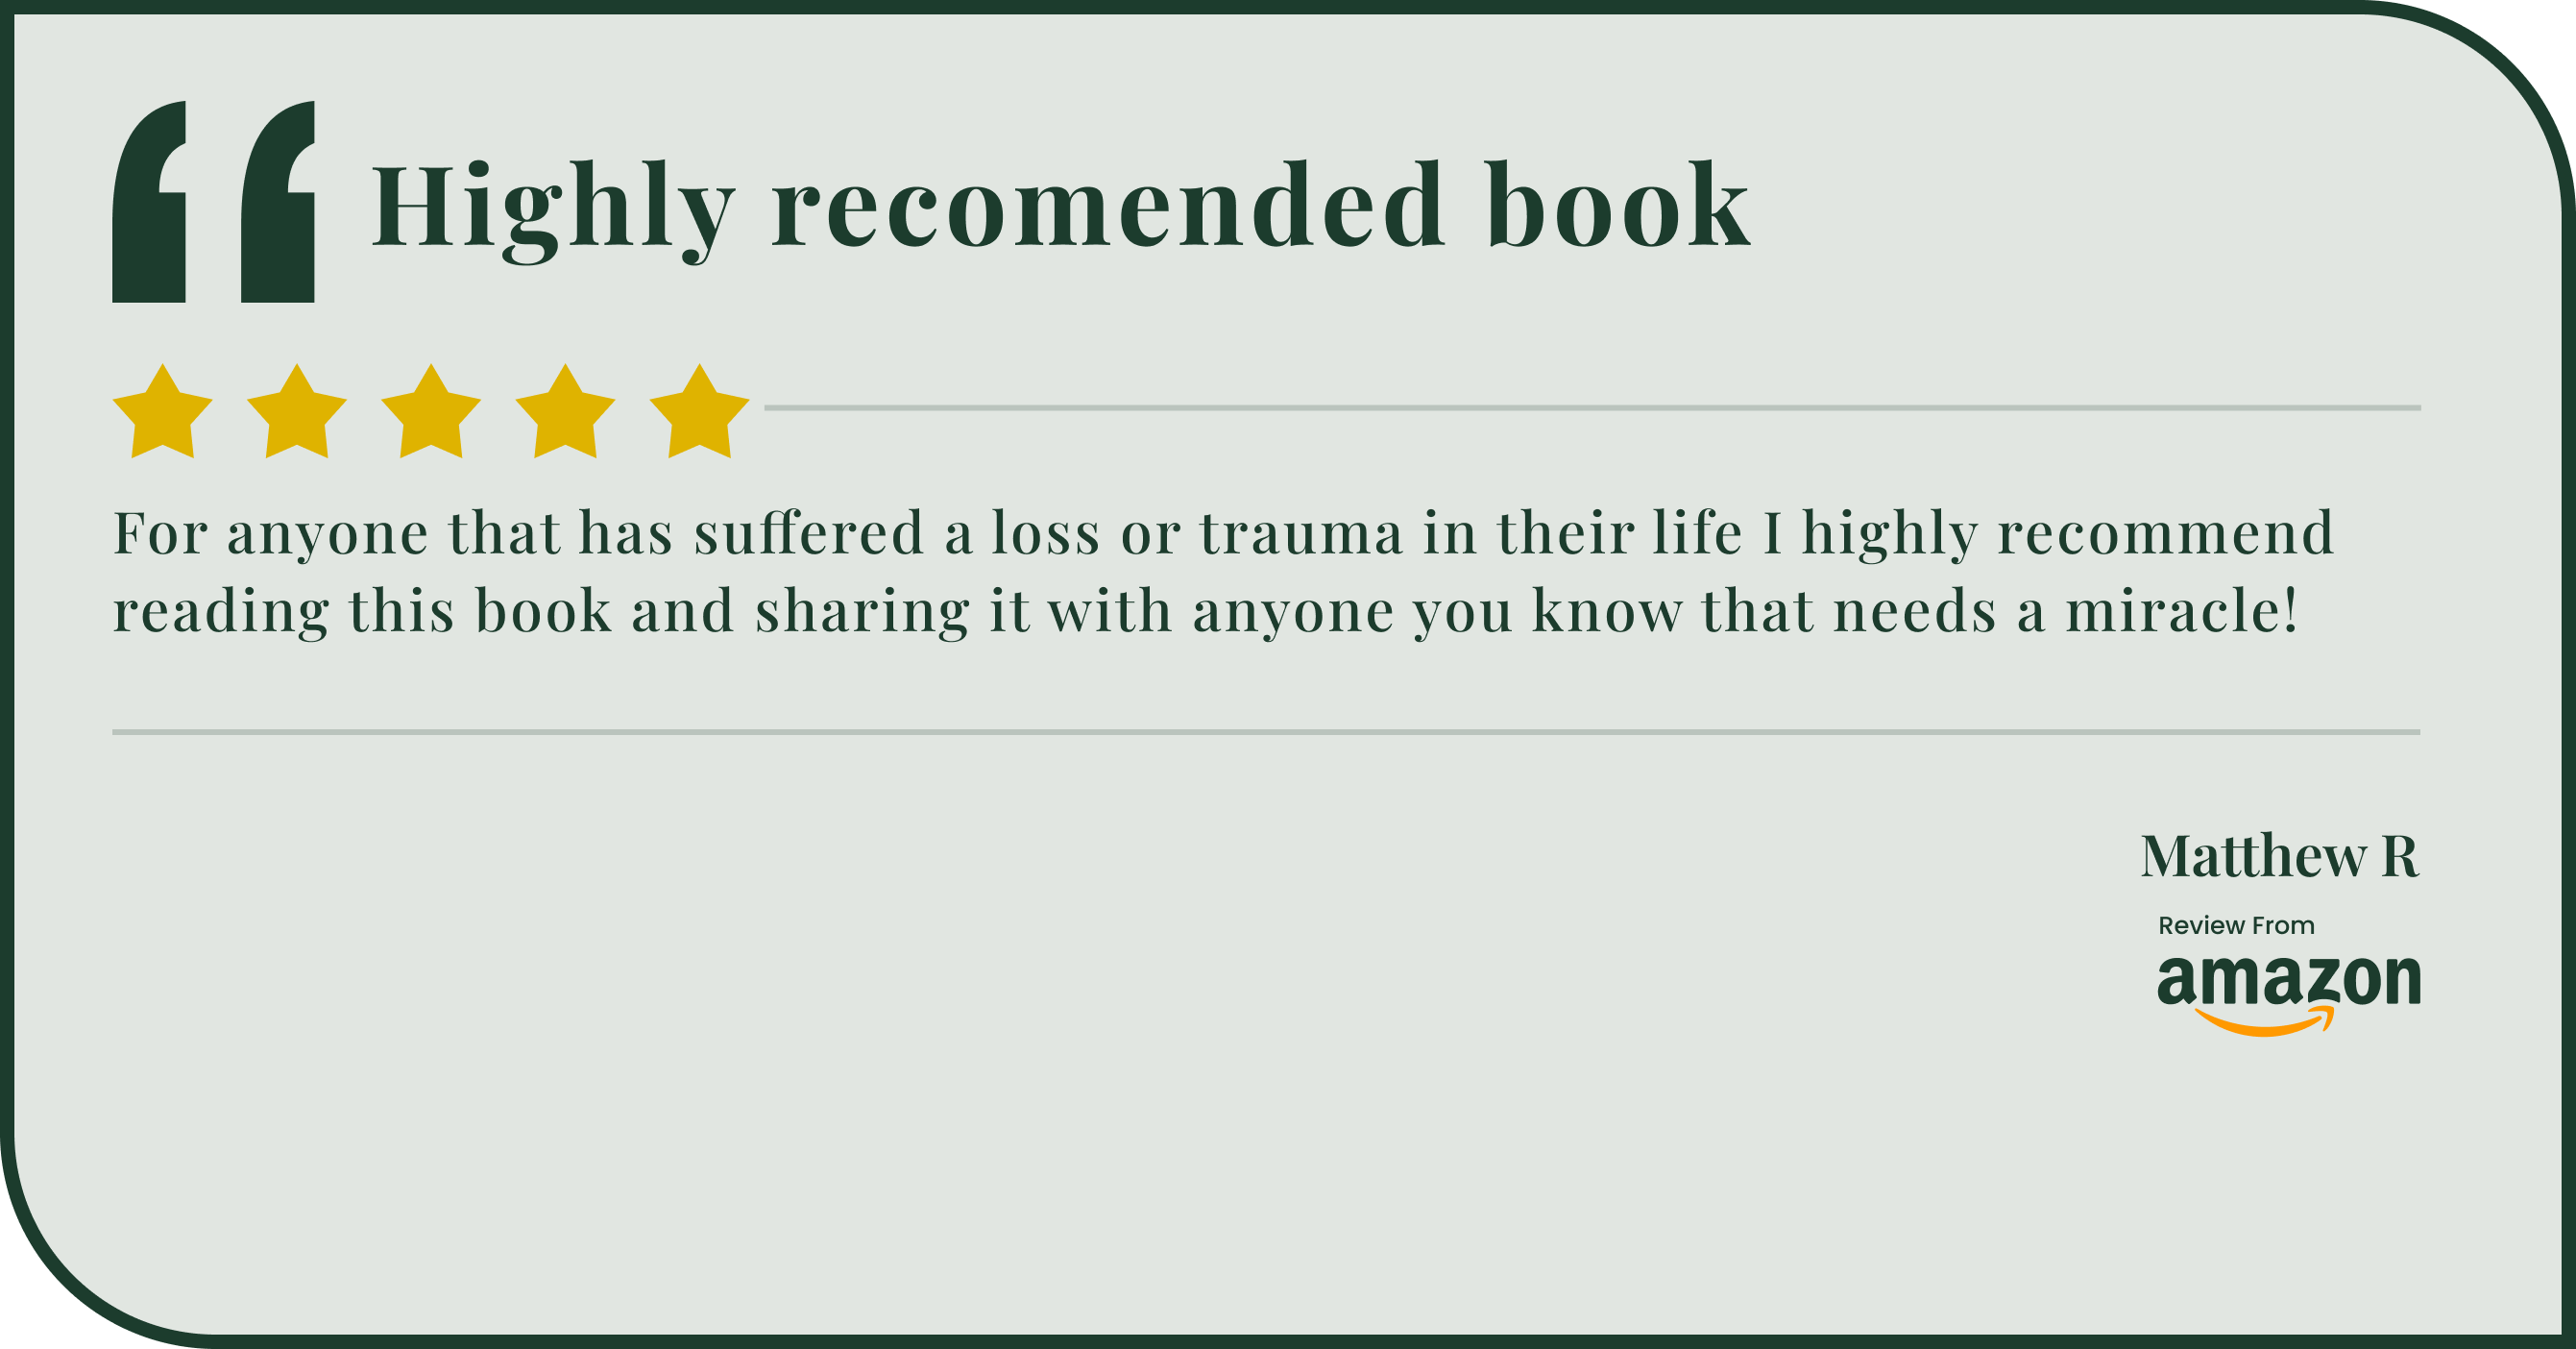 Amazon review recommending book for overcoming loss, trauma.